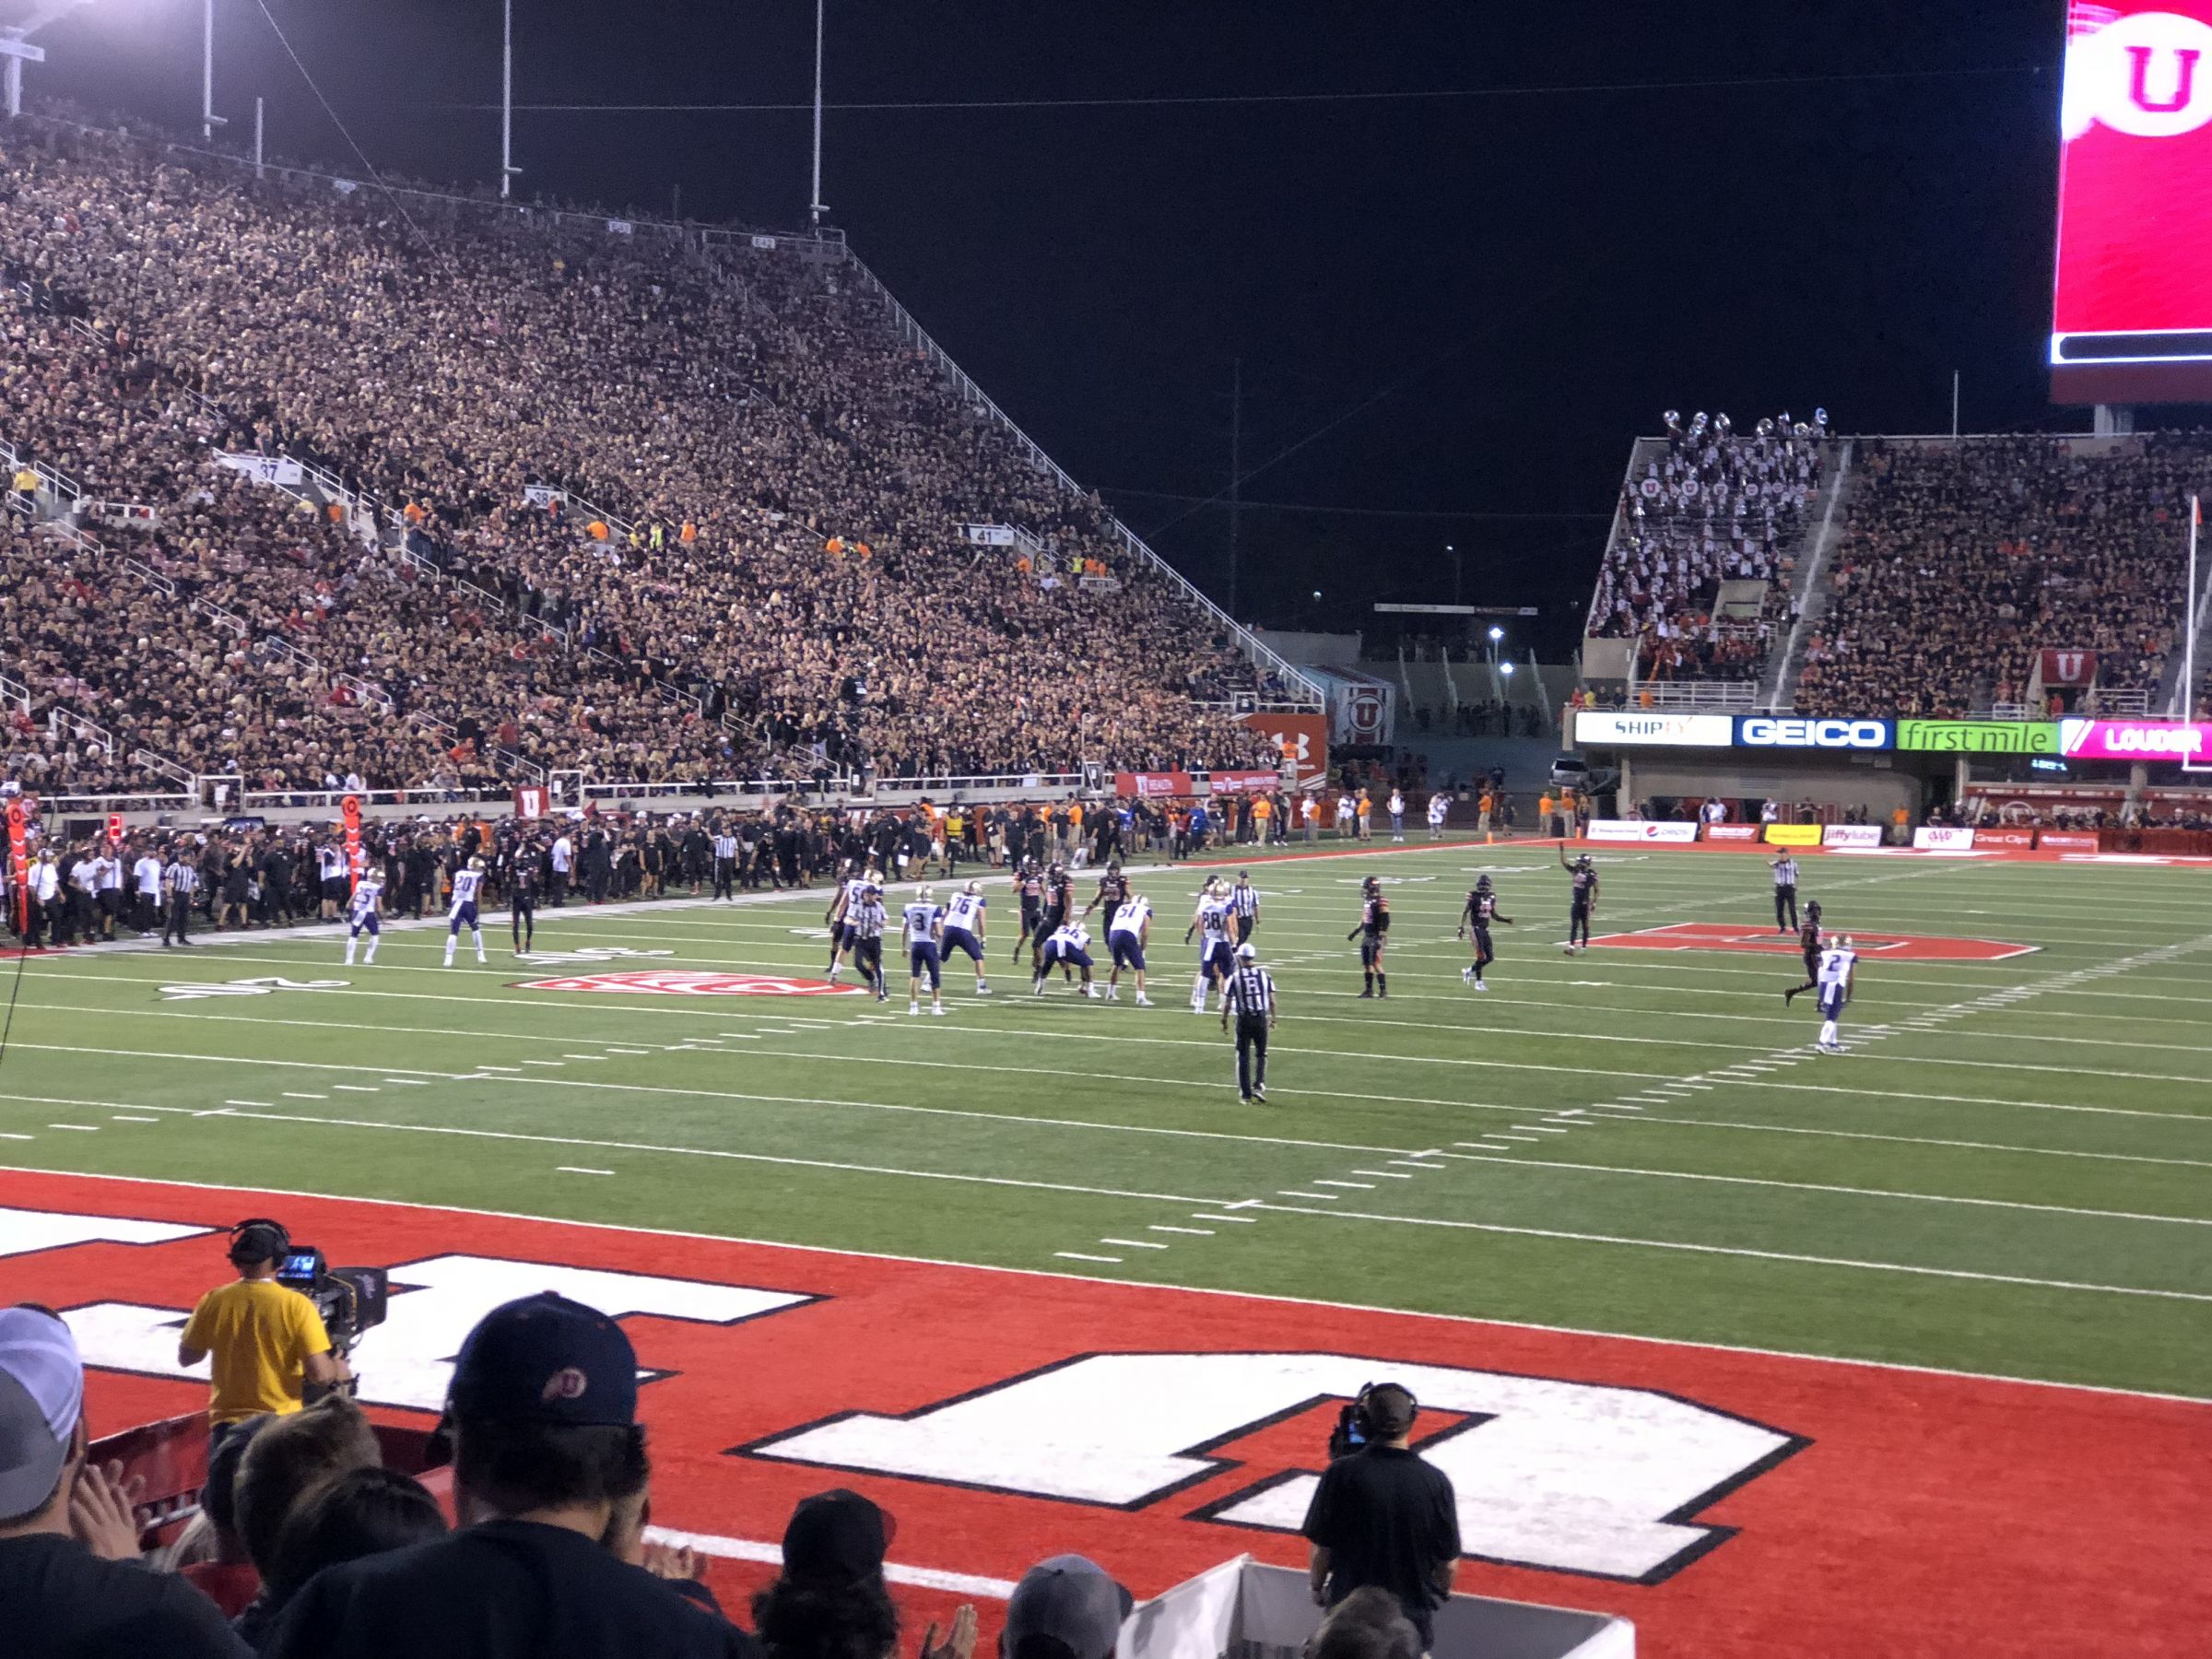 section n23, row 10 seat view  - rice-eccles stadium